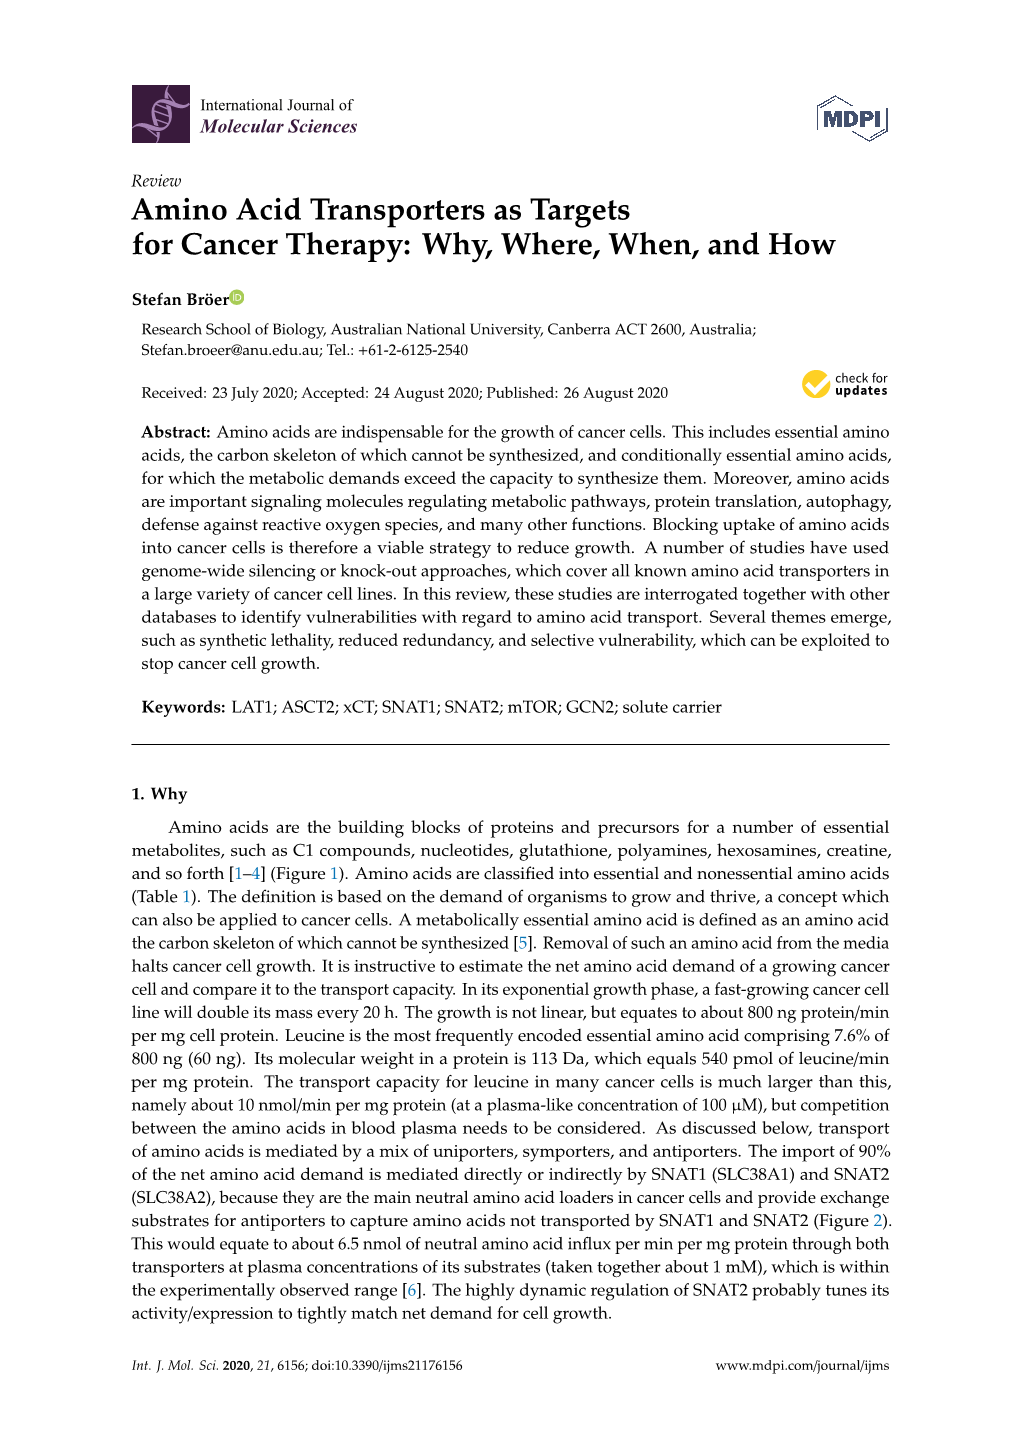 Amino Acid Transporters As Targets for Cancer Therapy: Why, Where, When, and How